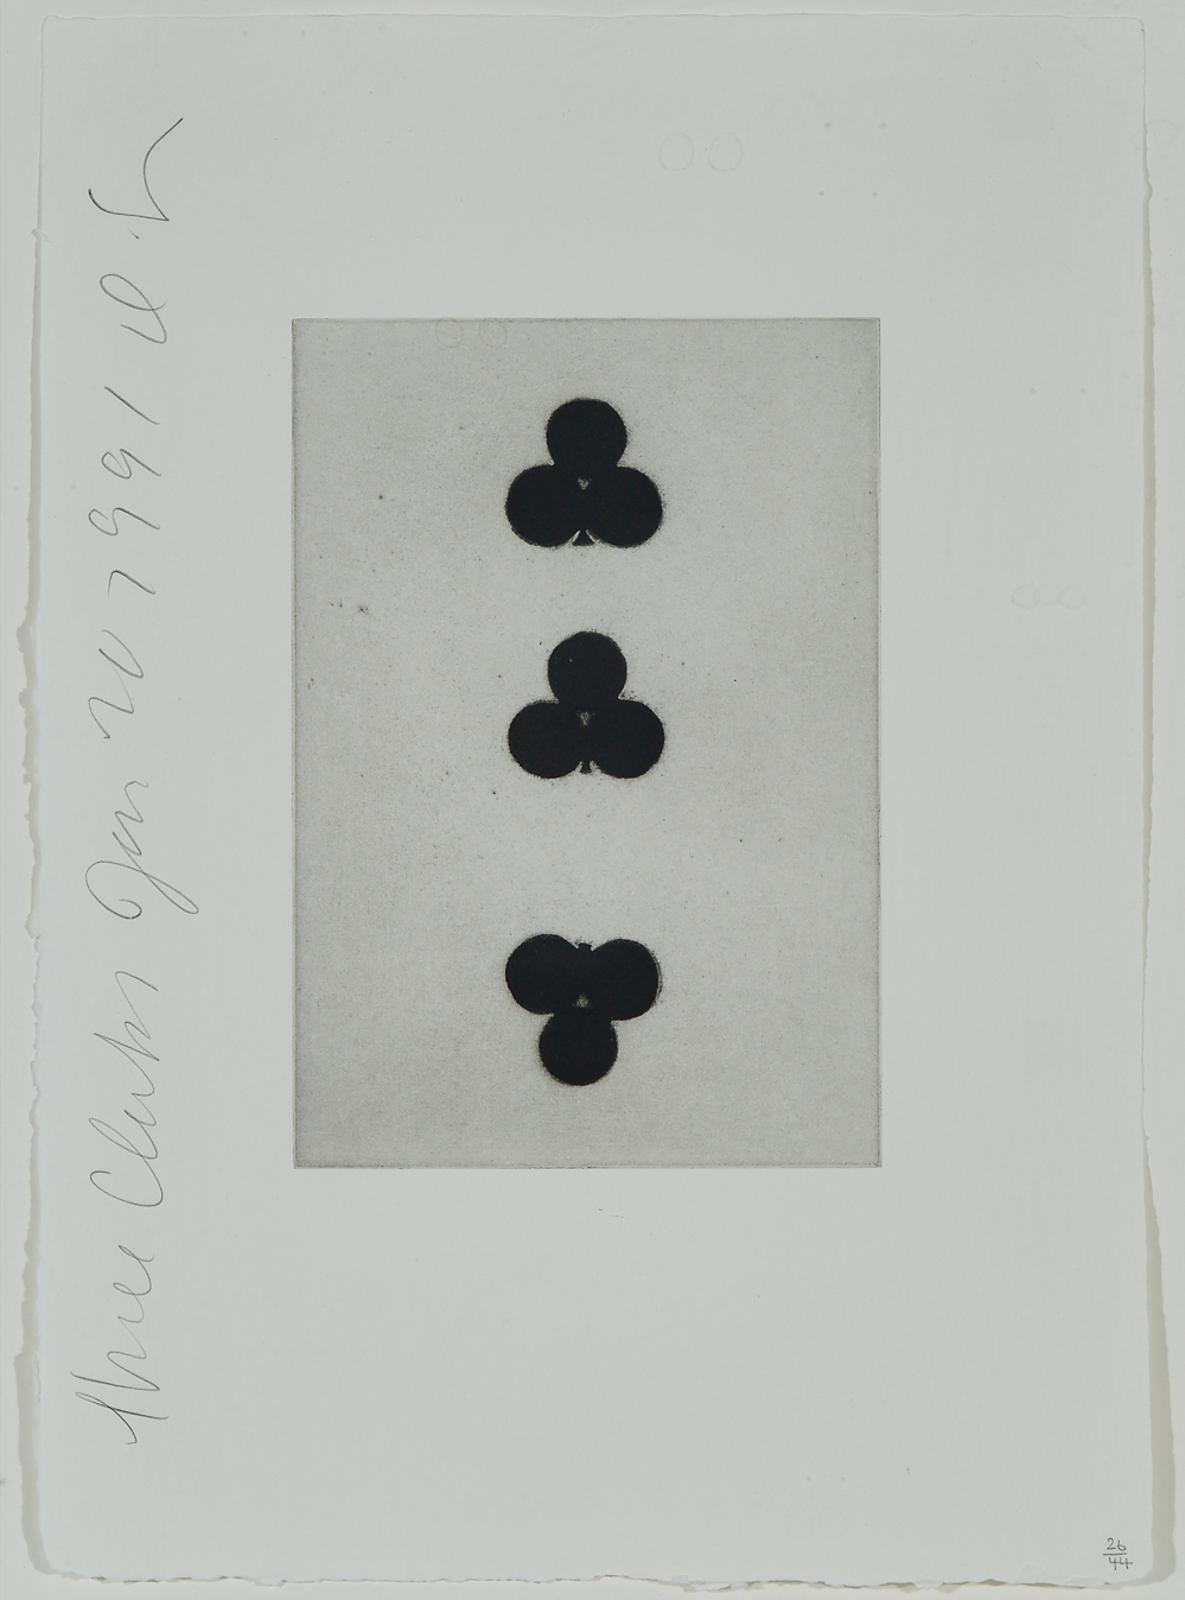 Donald Sultan (1951) - Three Clubs (From Playing Cards Series), 1991